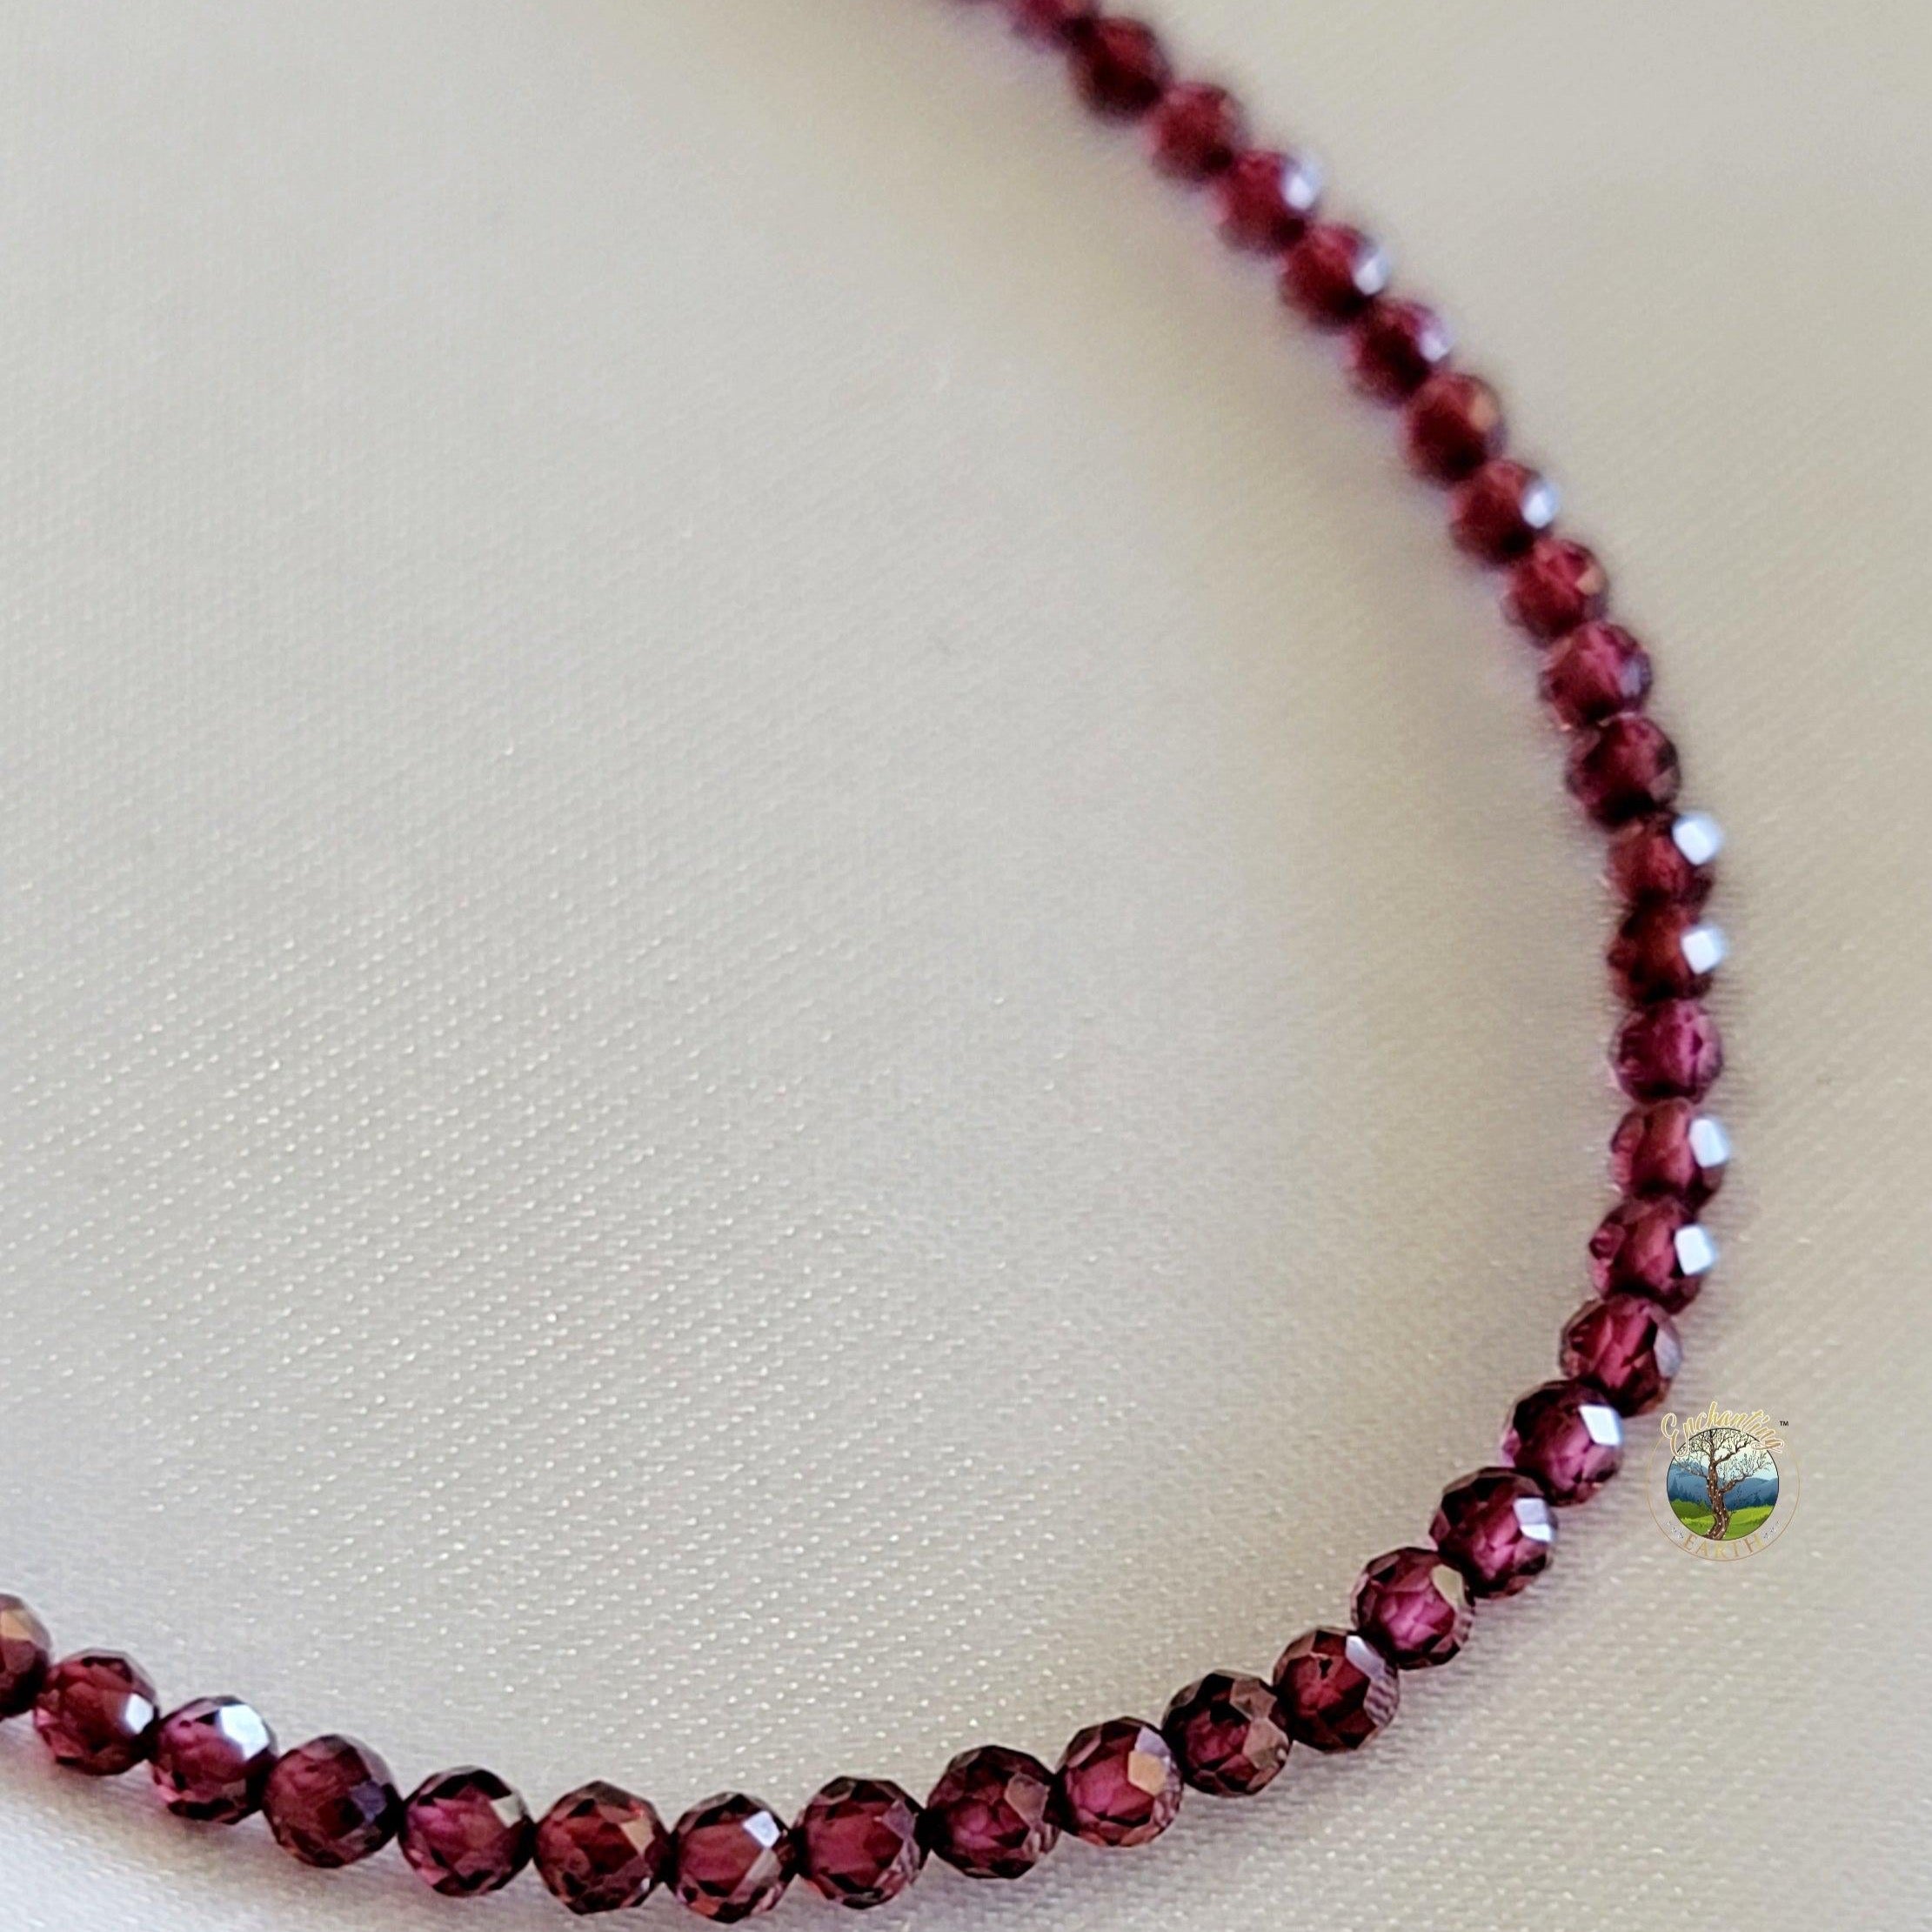 Garnet (Pinkish Red) Micro Faceted Bracelet for Grounding, Health and Strength